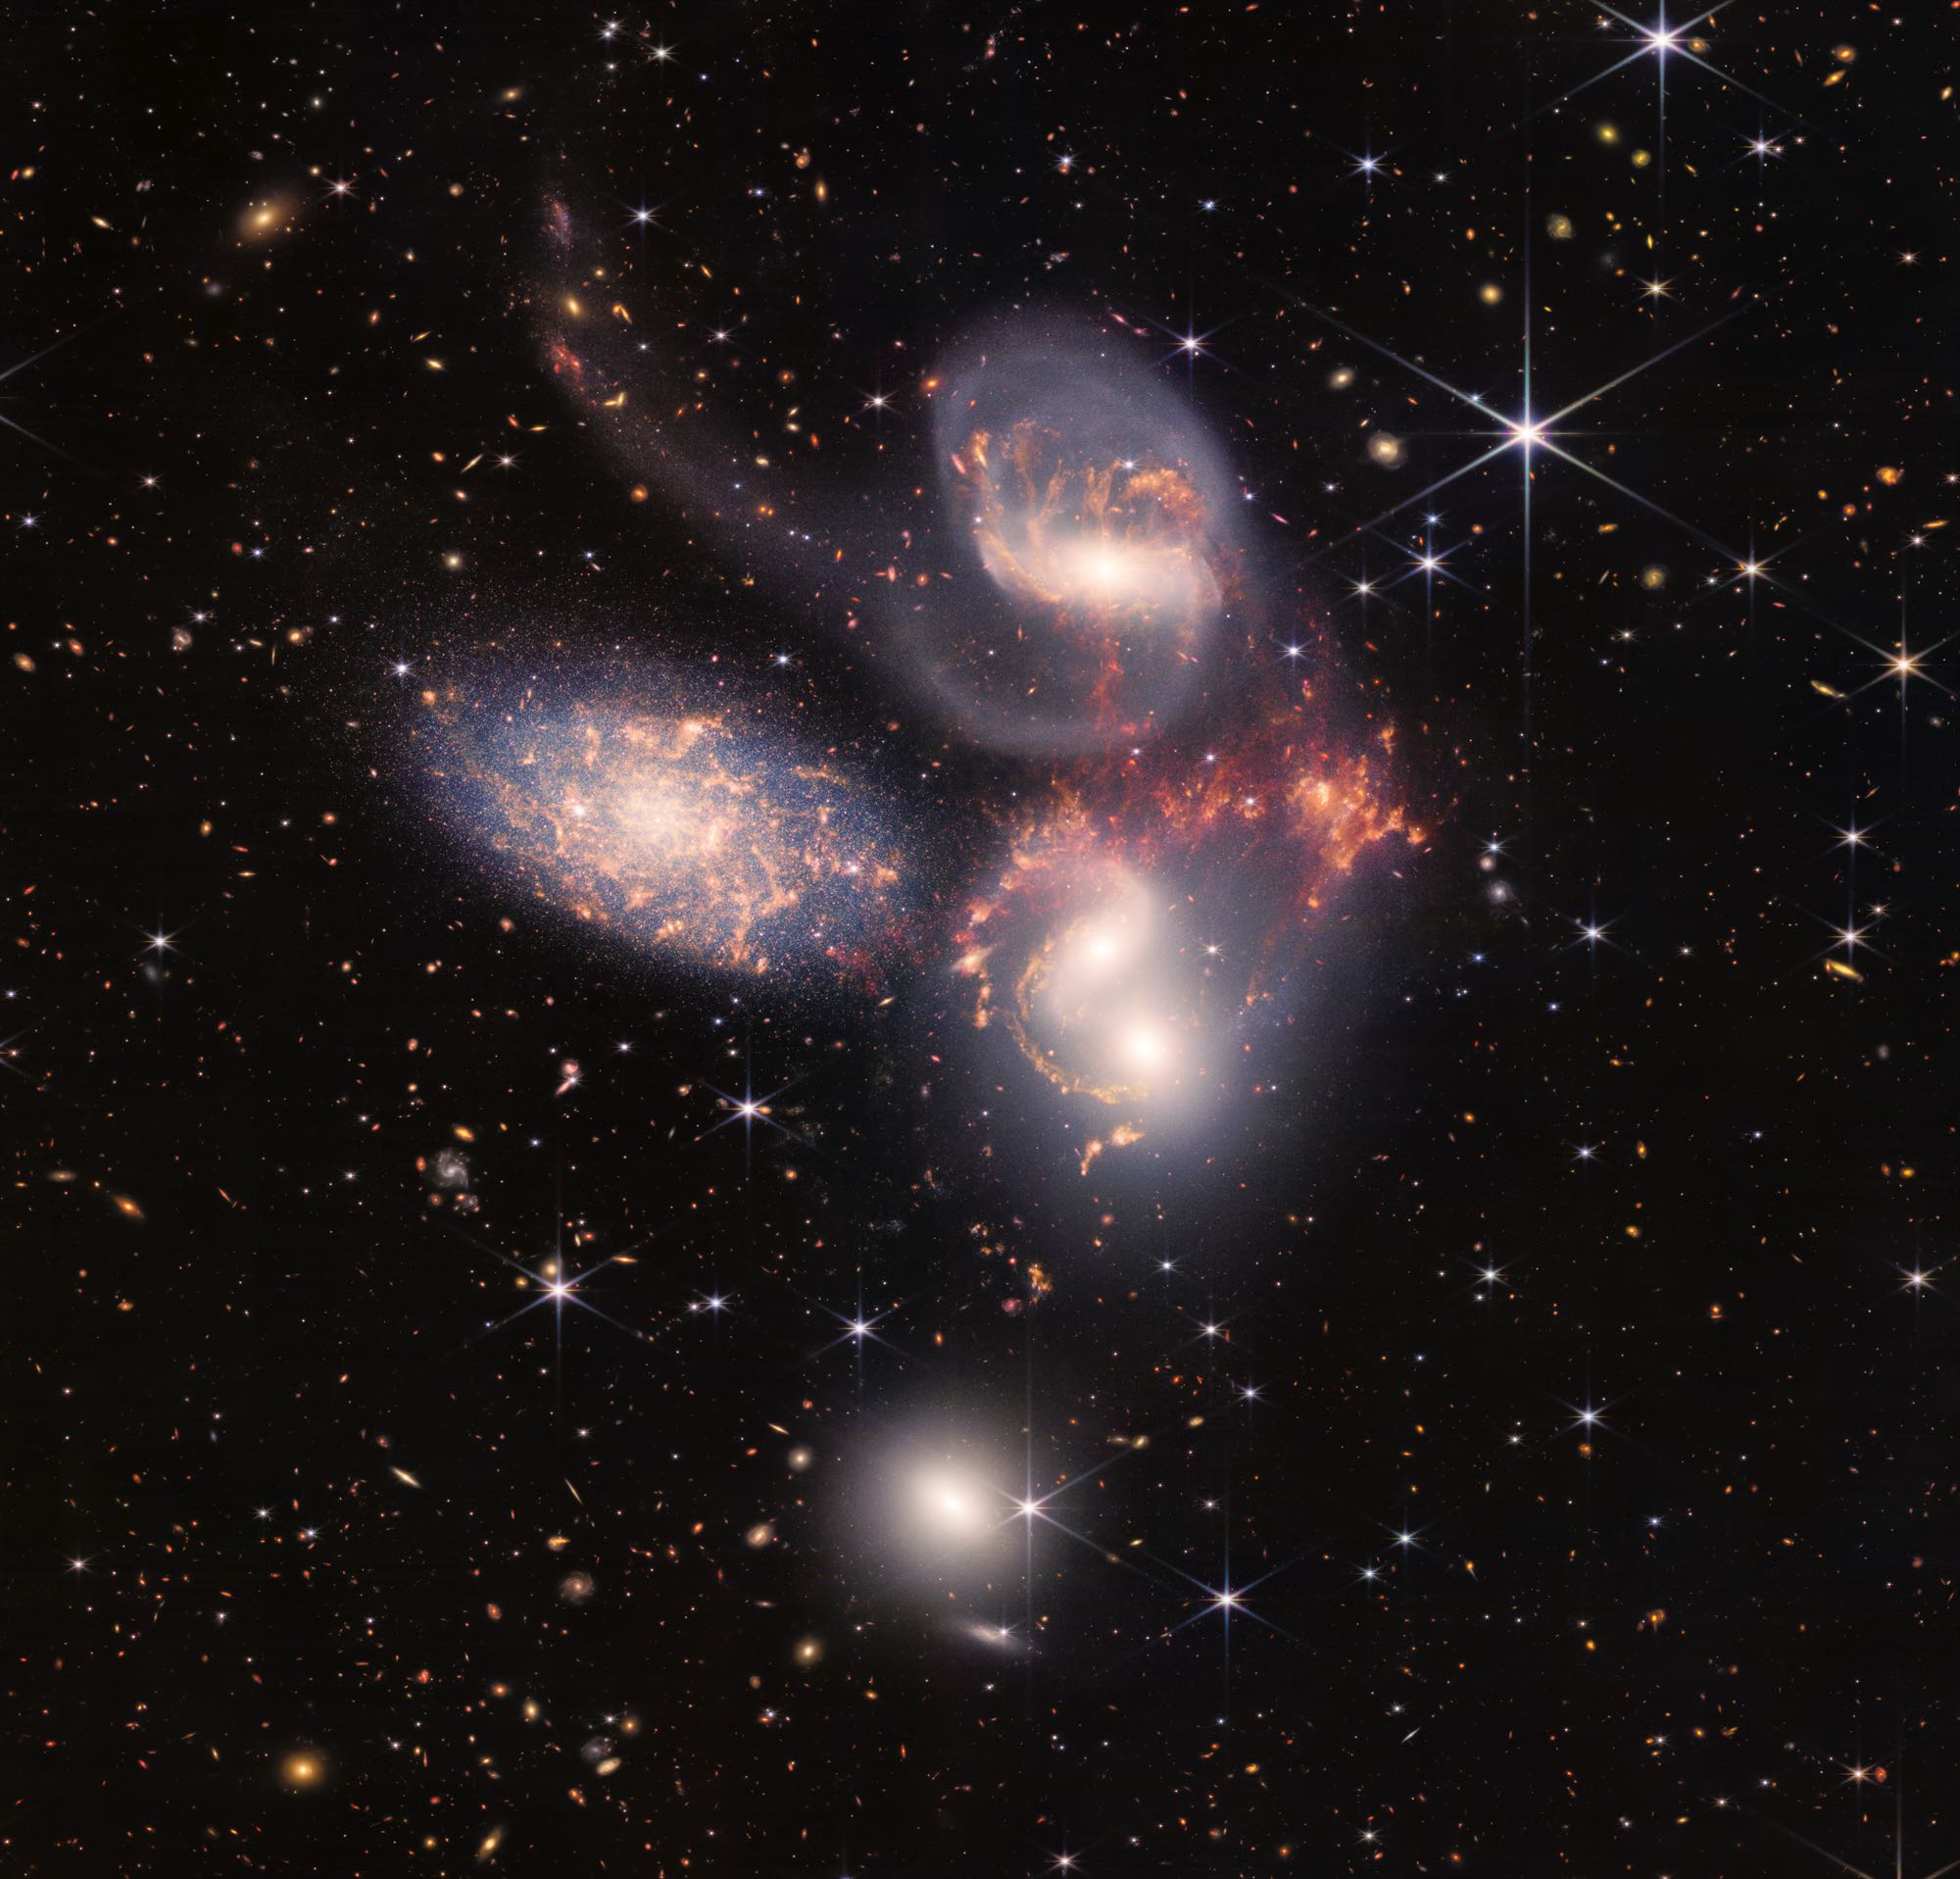 An enormous mosaic of Stephan’s Quintet is the largest image to date from NASA’s James Webb Space Telescope, covering about one-fifth of the Moon’s diameter. It contains over 150 million pixels and is constructed from almost 1,000 separate image files. The visual grouping of five galaxies was captured by Webb’s Near-Infrared Camera (NIRCam) and Mid-Infrared Instrument (MIRI). With its powerful, infrared vision and extremely high spatial resolution, Webb shows never-before-seen details in this galaxy group. Sparkling clusters of millions of young stars and starburst regions of fresh star birth grace the image. Sweeping tails of gas, dust and stars are being pulled from several of the galaxies due to gravitational interactions. Most dramatically, Webb’s MIRI instrument captures huge shock waves as one of the galaxies, NGC 7318B, smashes through the cluster. These regions surrounding the central pair of galaxies are shown in the colors red and gold. This composite NIRCam-MIRI image uses two of the three MIRI filters to best show and differentiate the hot dust and structure within the galaxy. MIRI sees a distinct difference in color between the dust in the galaxies versus the shock waves between the interacting galaxies. The image processing specialists at the Space Telescope Science Institute in Baltimore opted to highlight that difference by giving MIRI data the distinct yellow and orange colors, in contrast to the blue and white colors assigned to stars at NIRCam’s wavelengths.  Together, the five galaxies of Stephan’s Quintet are also known as the Hickson Compact Group 92 (HCG 92). Although called a “quintet,” only four of the galaxies are truly close together and caught up in a cosmic dance. The fifth and leftmost galaxy, called NGC 7320, is well in the foreground compared with the other four. NGC 7320 resides 40 million light-years from Earth, while the other four galaxies (NGC 7317, NGC 7318A, NGC 7318B, and NGC 7319) are about 290 million light-years away. This is still fairly close in cosmic terms, compared with more distant galaxies billions of light-years away. Studying these relatively nearby galaxies helps scientists better understand structures seen in a much more distant universe. This proximity provides astronomers a ringside seat for witnessing the merging of and interactions between galaxies that are so crucial to all of galaxy evolution. Rarely do scientists see in so much exquisite detail how interacting galaxies trigger star formation in each other, and how the gas in these galaxies is being disturbed. Stephan’s Quintet is a fantastic “laboratory” for studying these processes fundamental to all galaxies. Tight groups like this may have been more common in the early universe when their superheated, infalling material may have fueled very energetic black holes called quasars. Even today, the topmost galaxy in the group – NGC 7319 – harbors an active galactic nucleus, a supermassive black hole that is actively accreting material. In NGC 7320, the leftmost and closest galaxy in the visual grouping, NIRCam was remarkably able to resolve individual stars and even the galaxy’s bright core. Old, dying stars that are producing dust clearly stand out as red points with NIRCam. The new information from Webb provides invaluable insights into how galactic interactions may have driven galaxy evolution in the early universe. As a bonus, NIRCam and MIRI revealed a vast sea of many thousands of distant background galaxies reminiscent of Hubble’s Deep Fields. NIRCam was built by a team at the University of Arizona and Lockheed Martin’s Advanced Technology Center. MIRI was contributed by ESA and NASA, with the instrument designed and built by a consortium of nationally funded European Institutes (The MIRI European Consortium) in partnership with JPL and the University of Arizona. For a full array of Webb’s first images and spectra, including downloadable files, please visit: https://webbtelescope.org/news/first-images